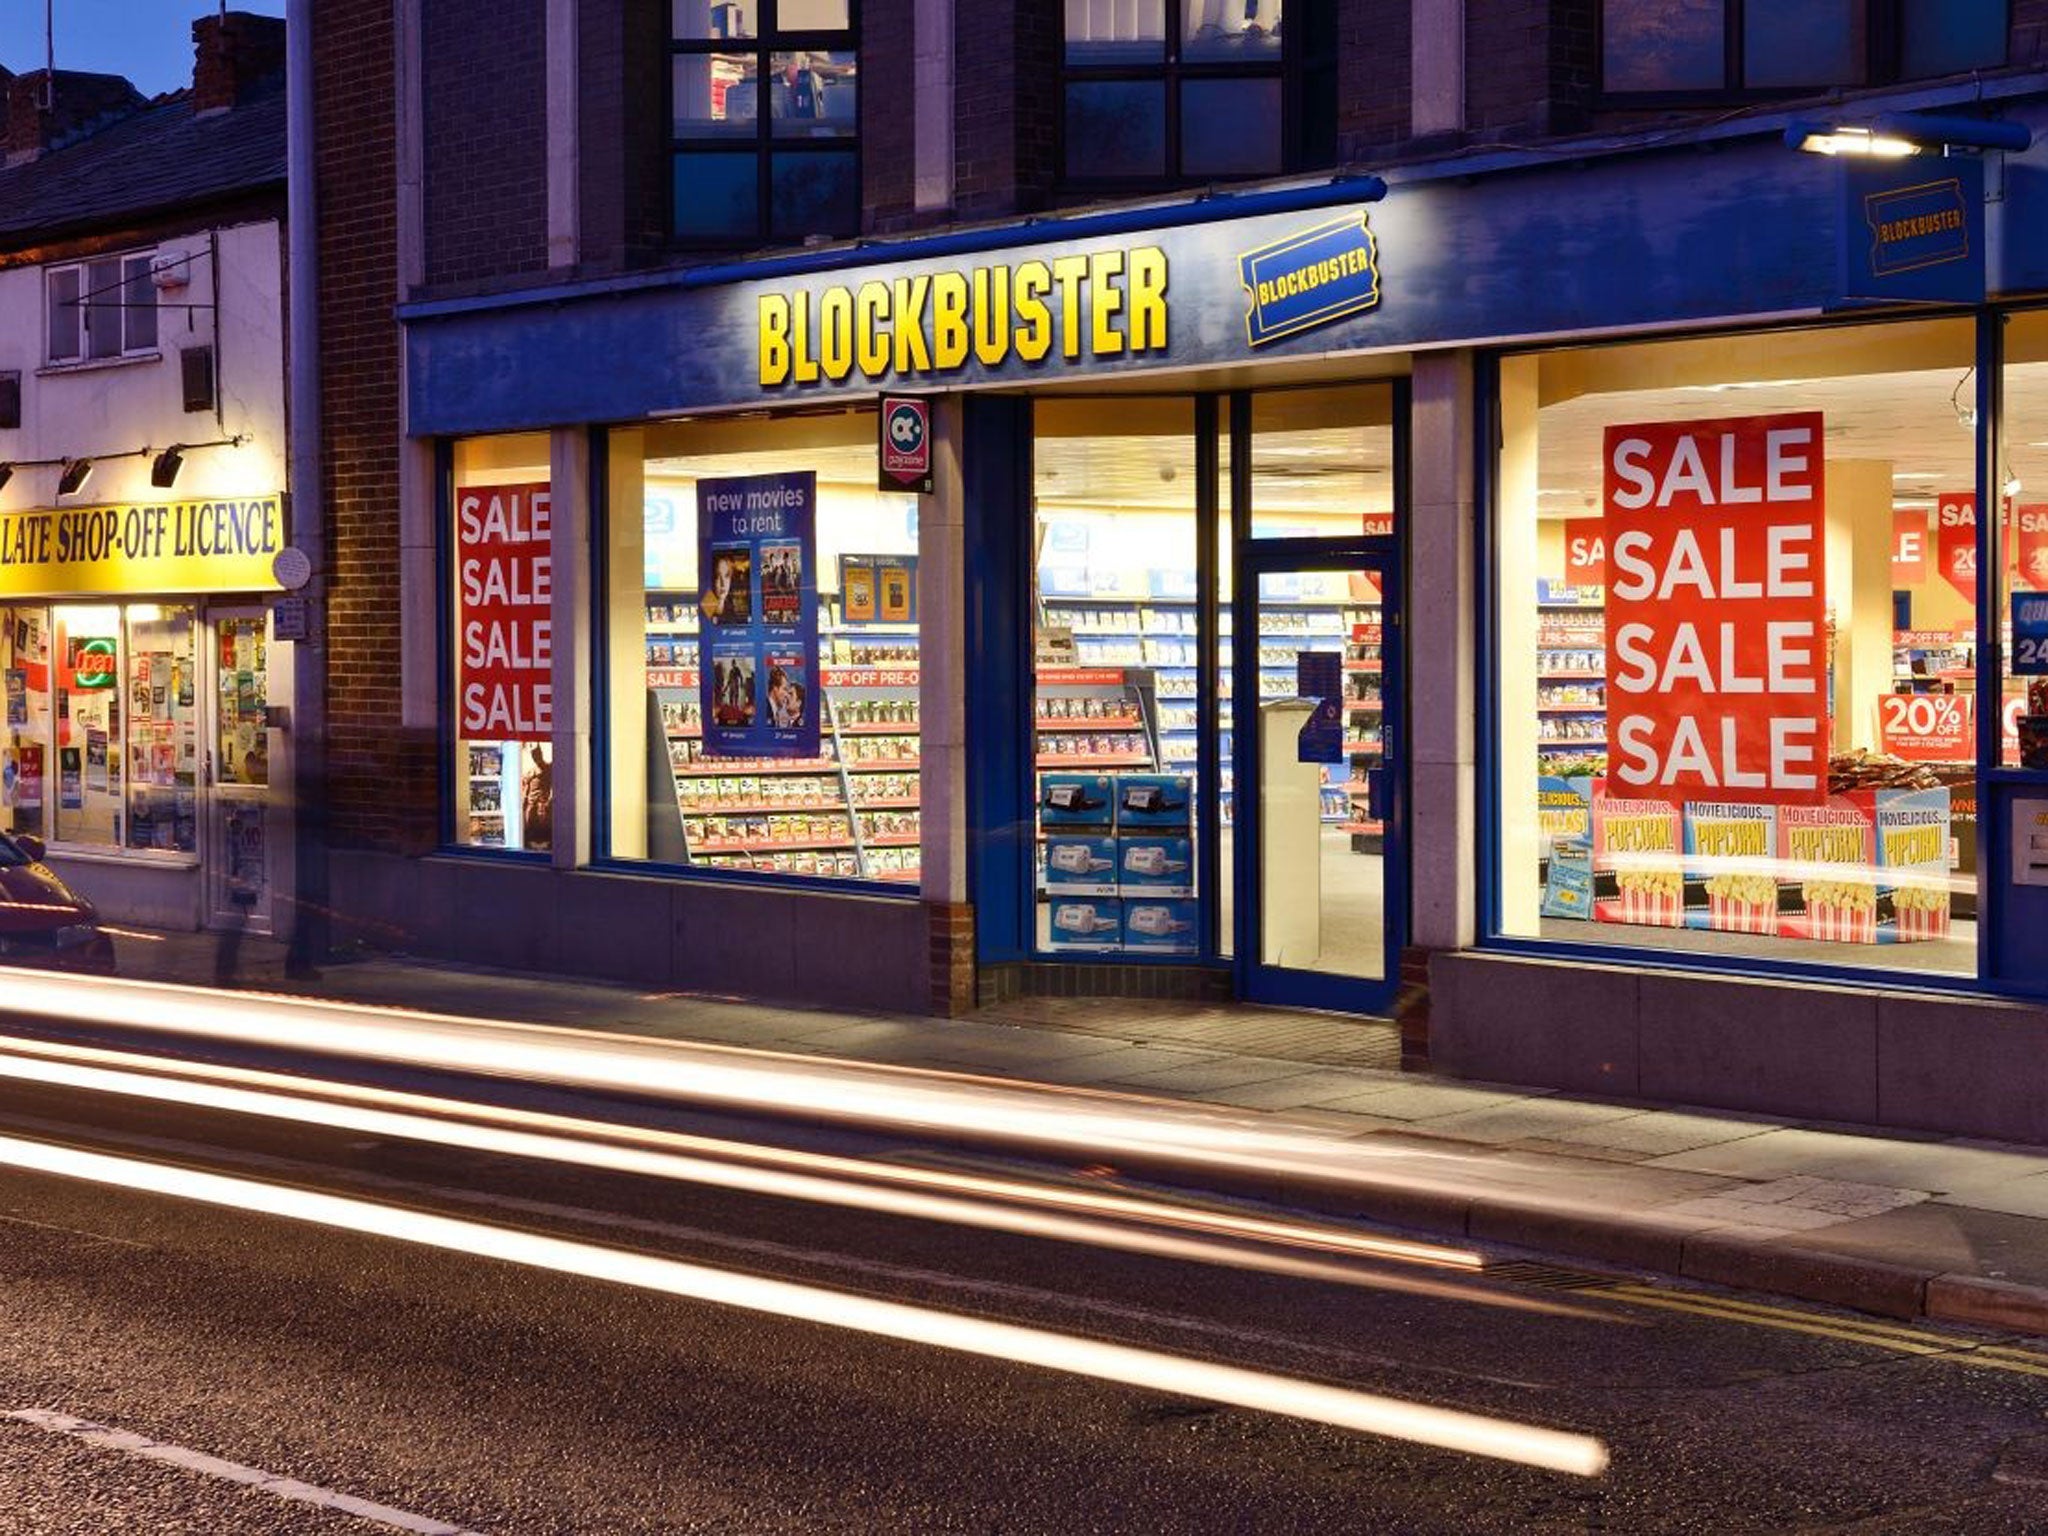 Blockbuster appears to be on an inevitable decline